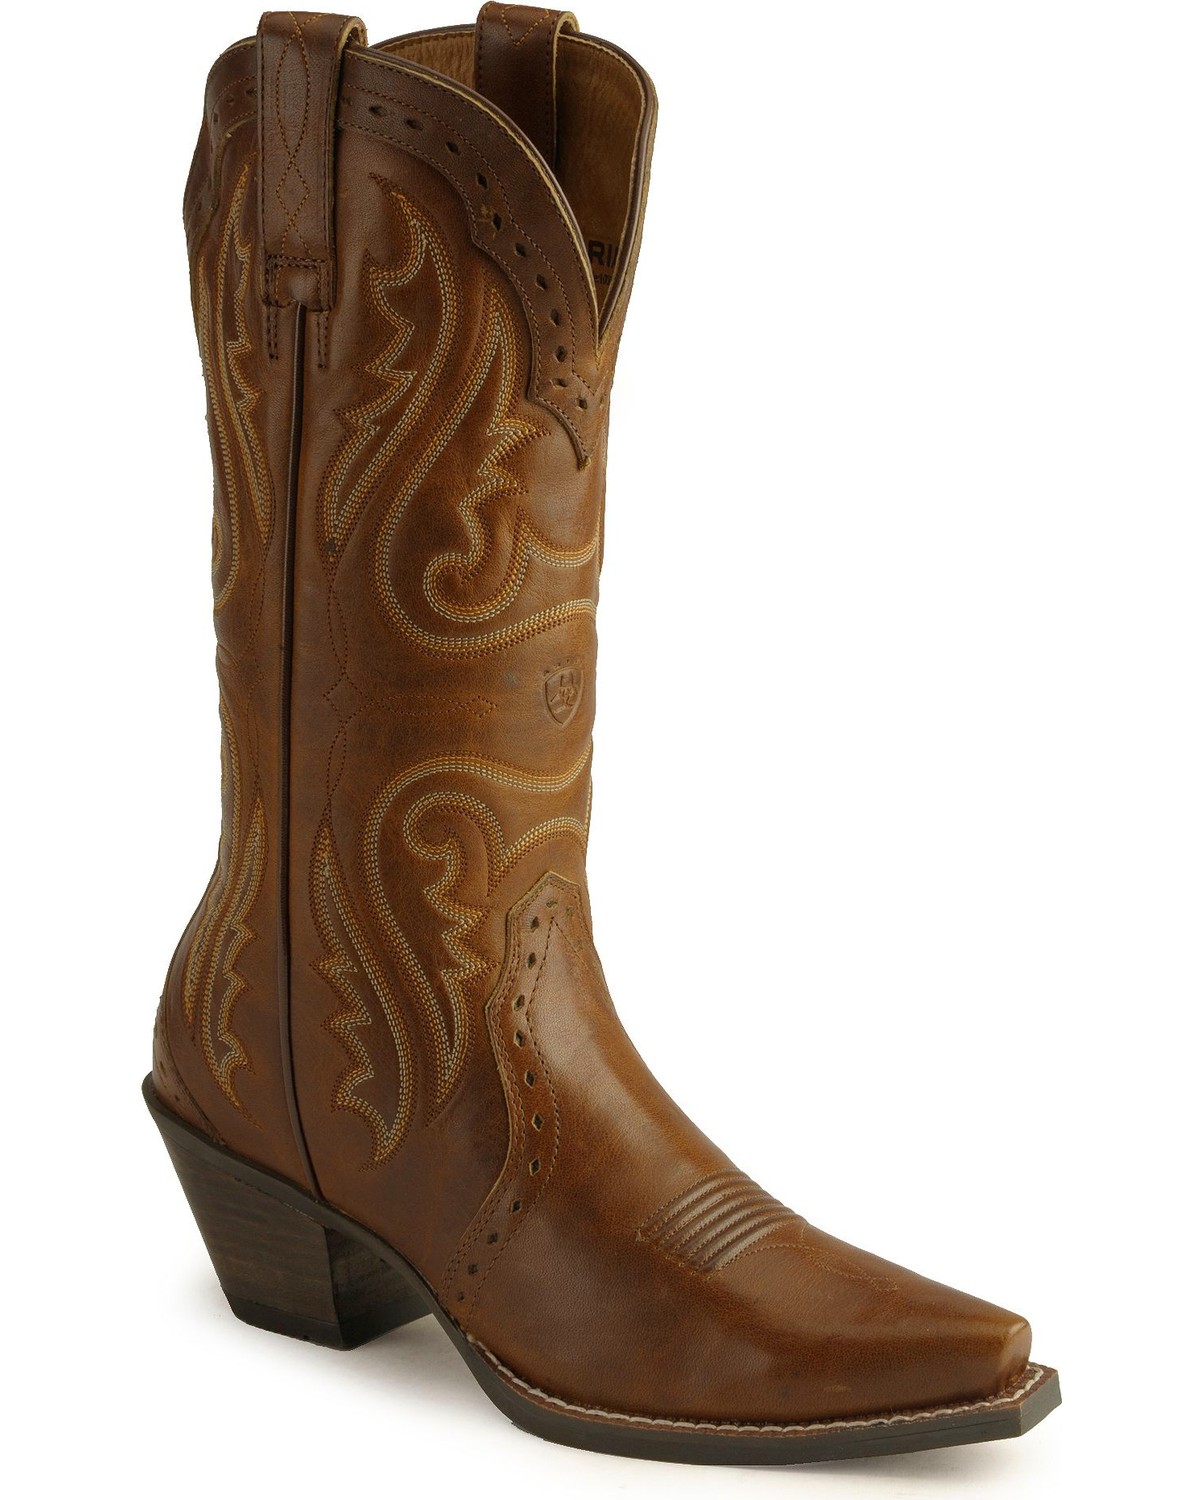 Heritage Vintage Western Boots | Boot Barn